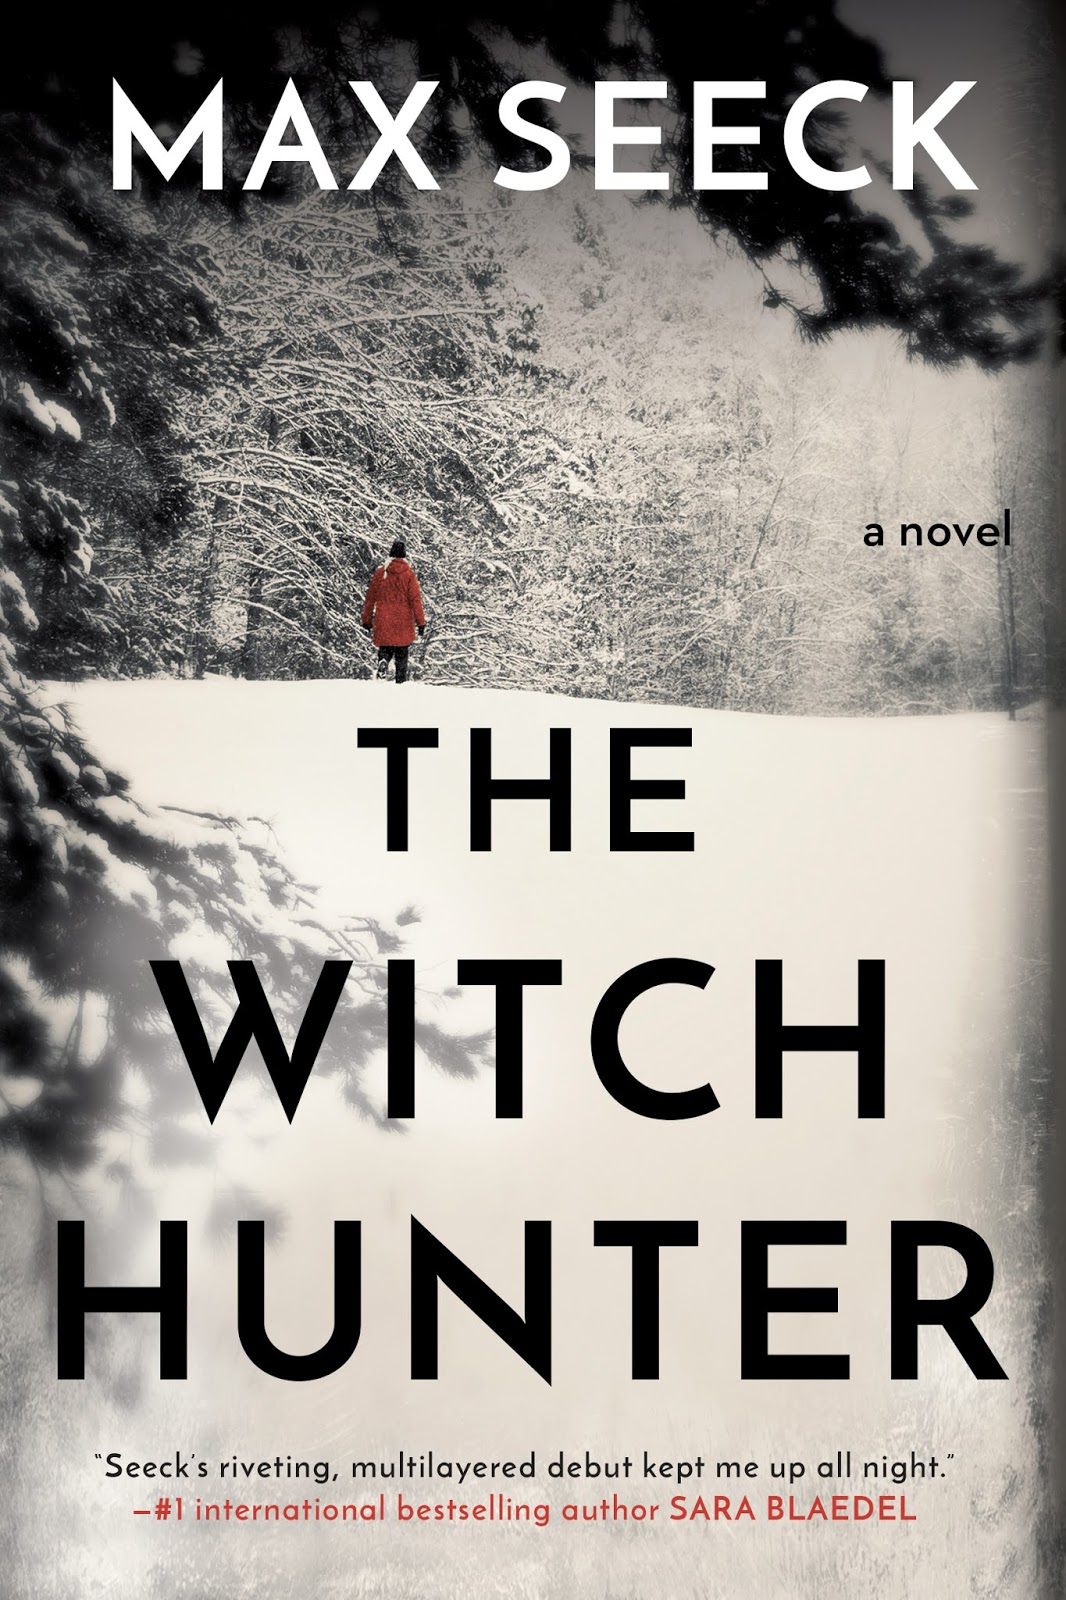 Review: The Witch Hunter by Max Seeck